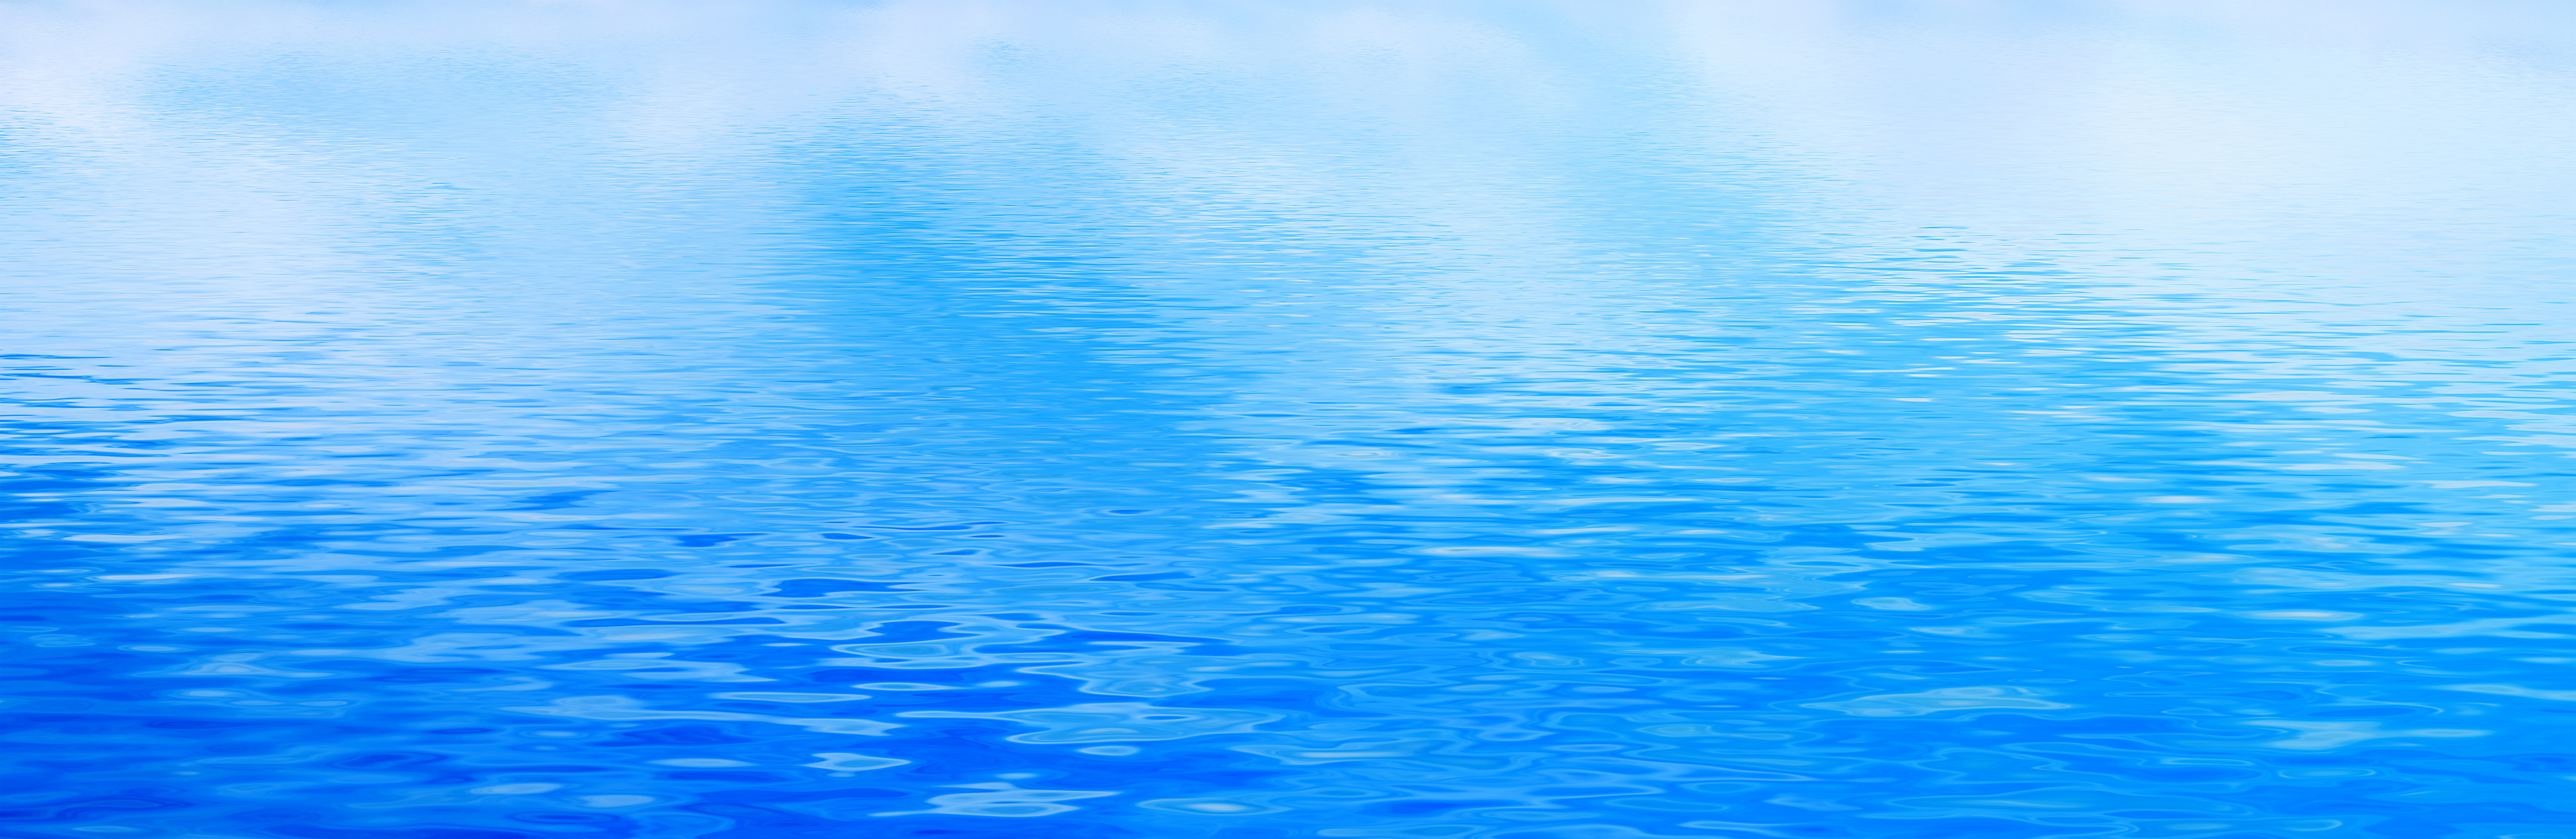 Clean Water Background